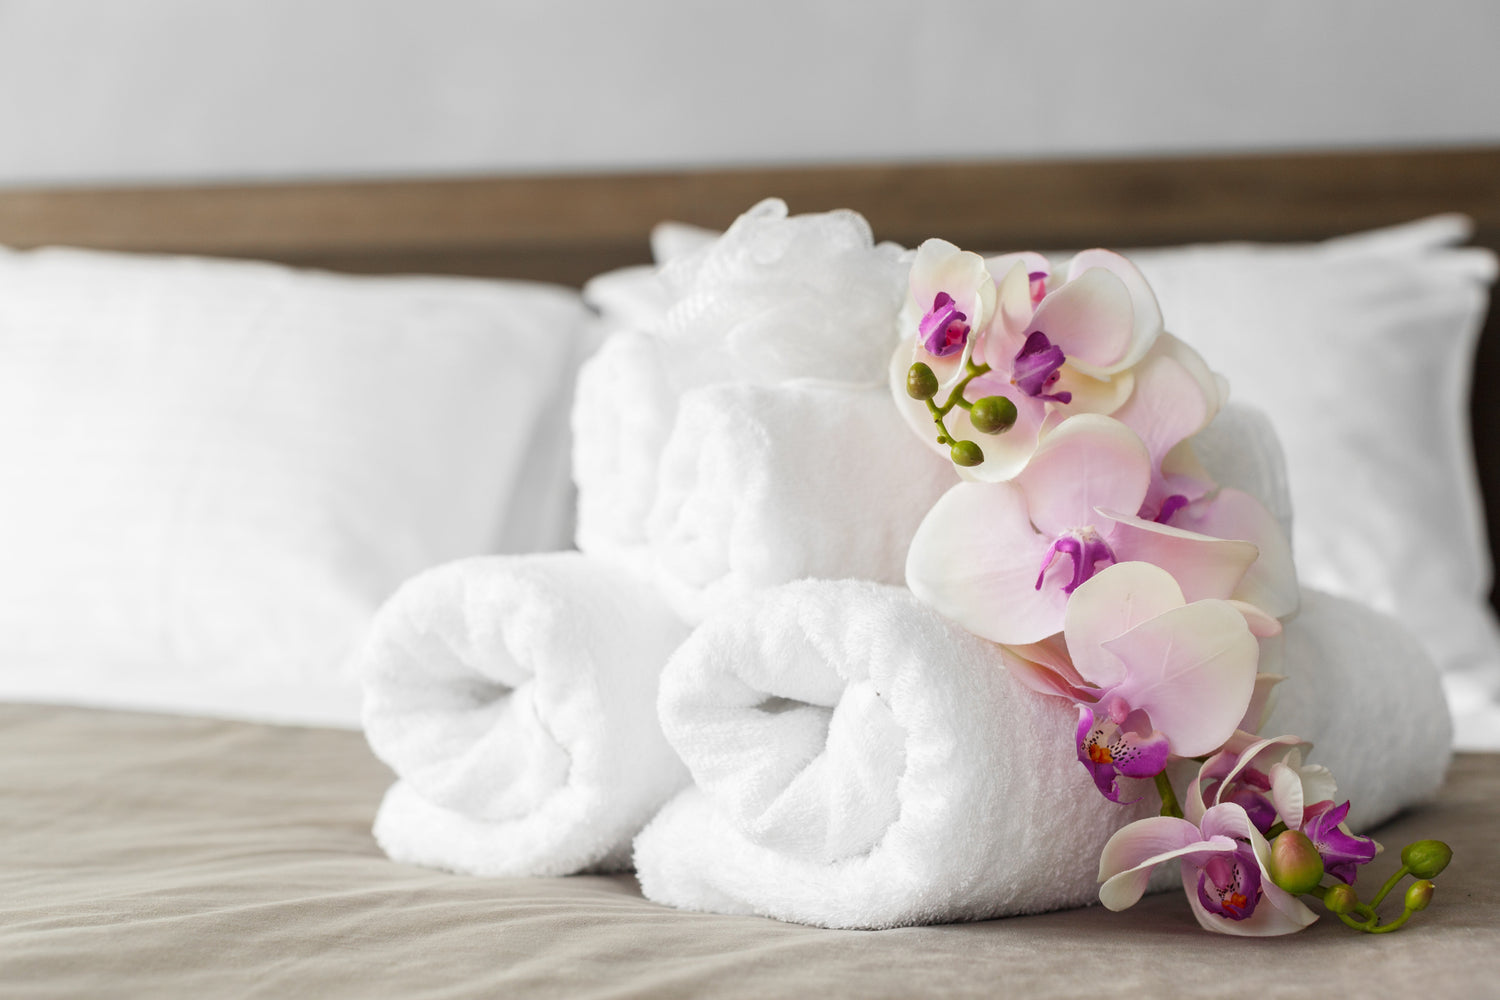 A collection of soft hotel towels and face cloths